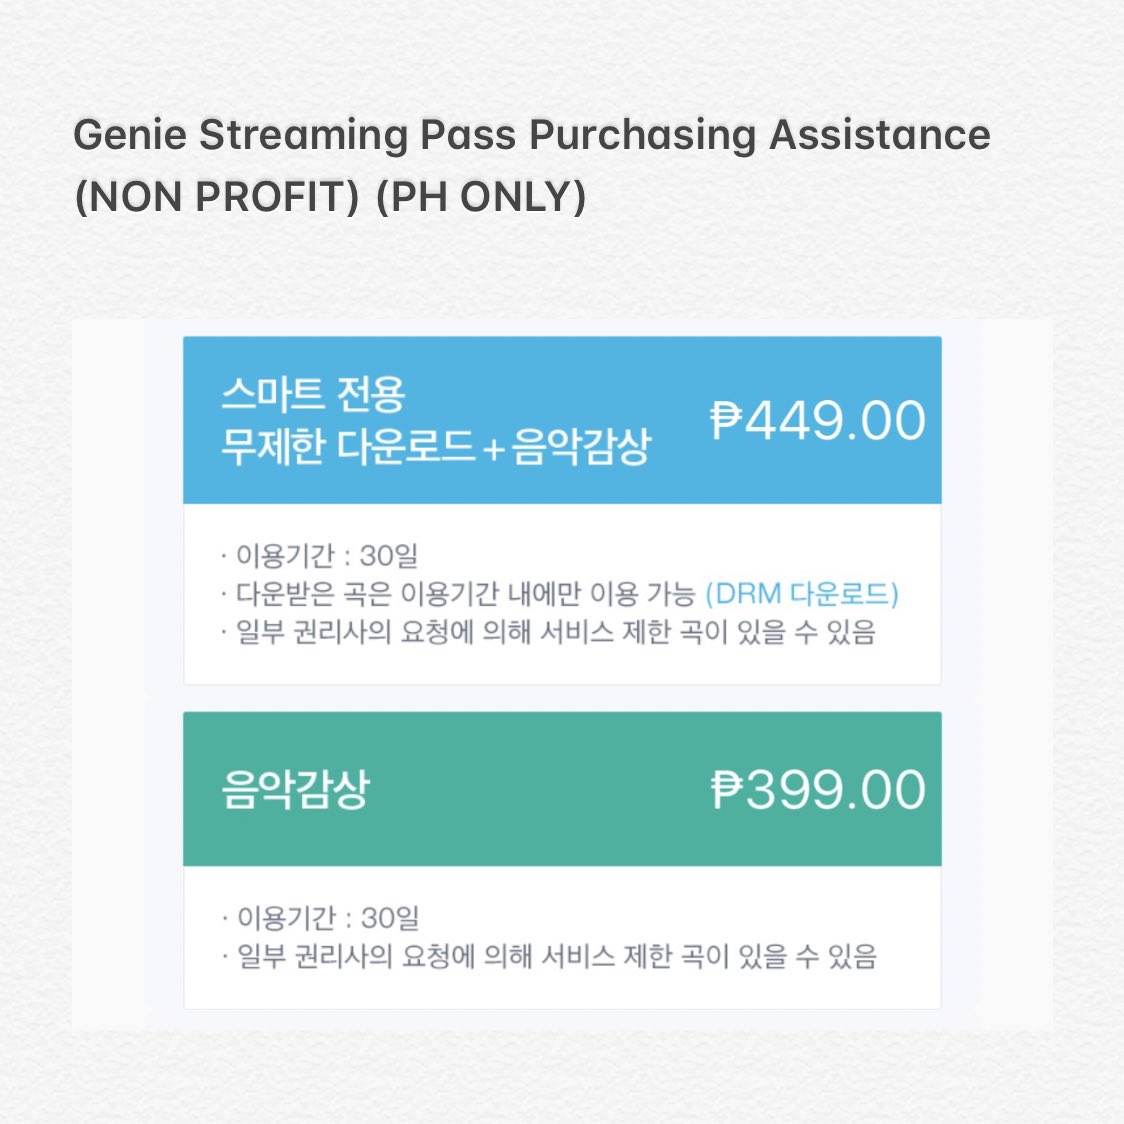 < Genie > Streaming Pass Purchasing Assistance [NON PROFIT] PH  ONLY!STAYS who need assistance buying genie streaming pass you can fill up the form below Please help RT!  https://docs.google.com/forms/d/e/1FAIpQLScm_yGYW80eNKkn8VcZgHa0KDst2QHLSt596RAGAFcd1Qkgyw/viewform @Stray_Kids  #스트레이키즈  #IN生  #INLIFE #StrayKidsComeback